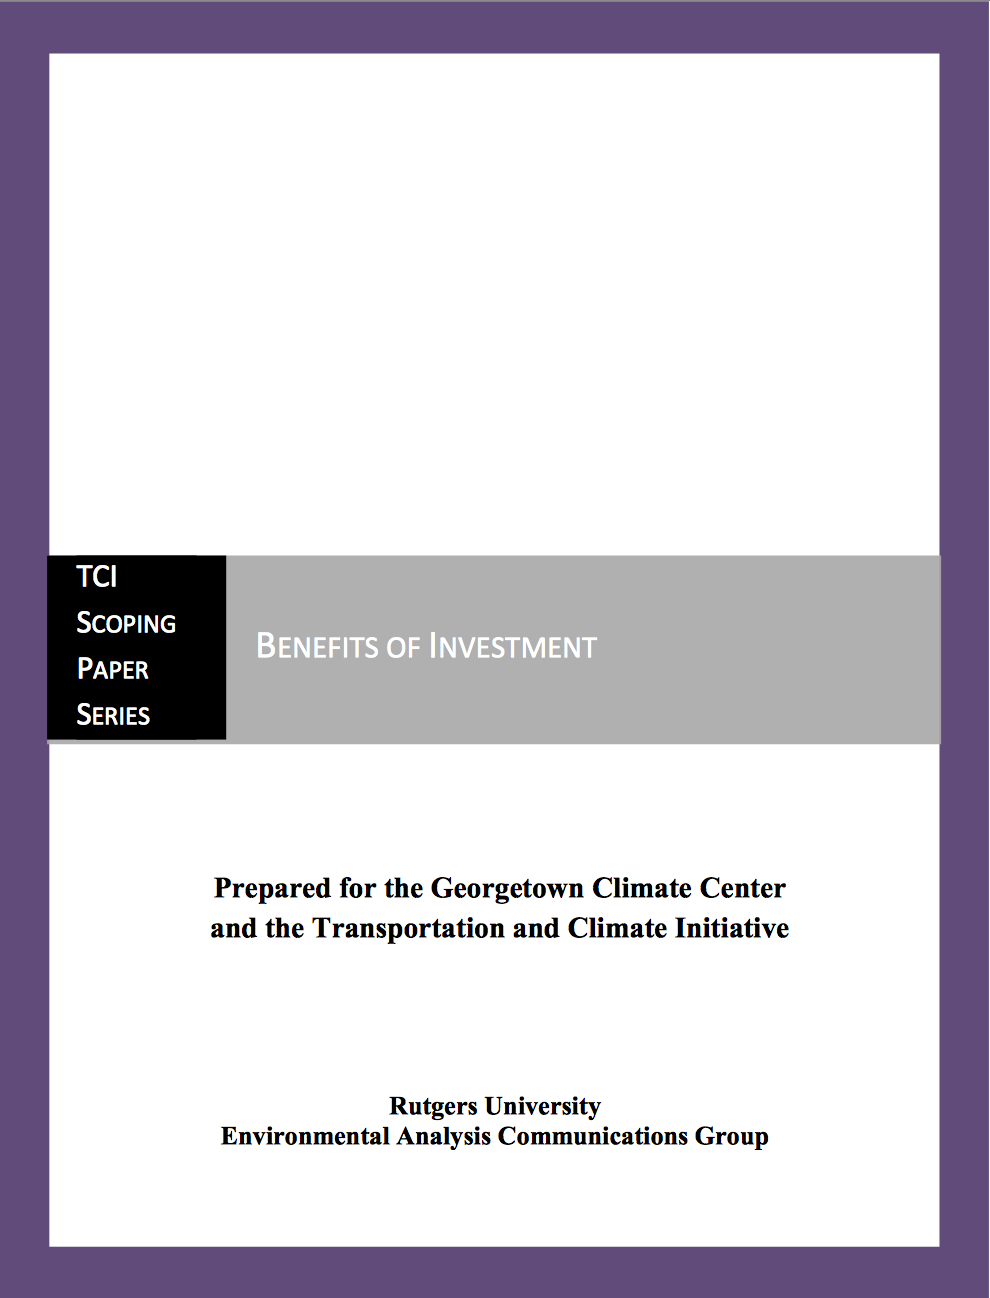 Sustainable Communities Indicators Research Paper Series: Benefits of Investment